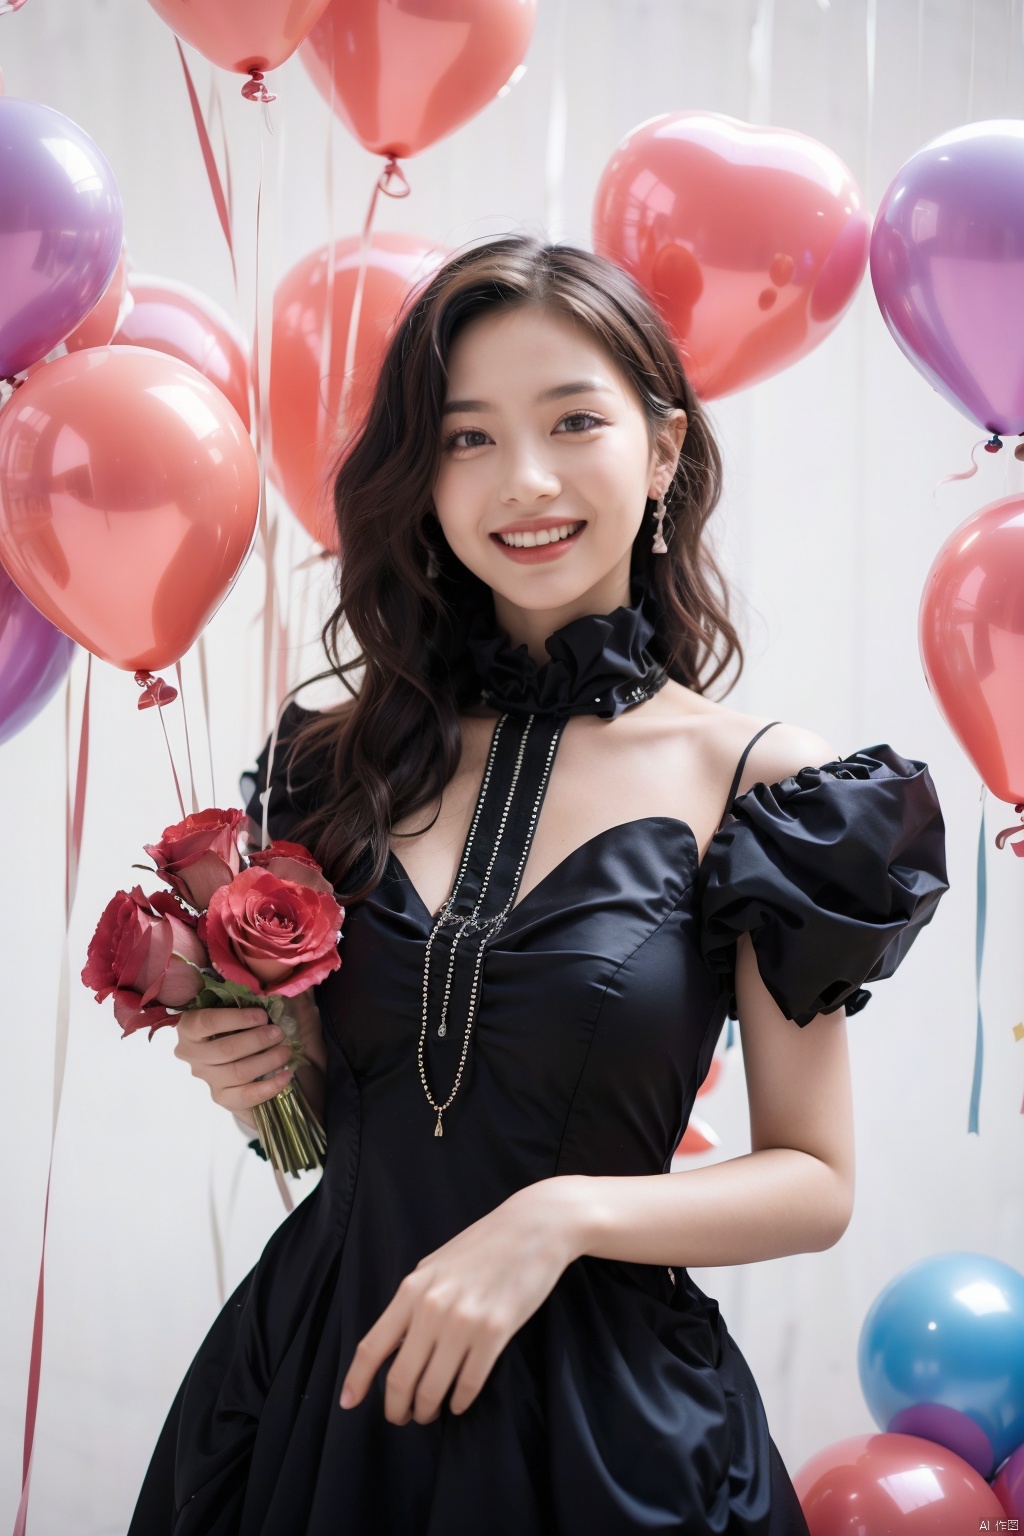 A young girl wearing a black dress, holding a book in her hand. Surrounded by colorful balloons, including a heart-shaped balloon. She is smiling happily, full of joy and celebration. The background is vibrant with roses. This is a high-definition, high-quality portrait with sharp focus and dreamy background. Colorful, lively, full of energy, youthful, innocent, happy, euphoric, celebratory, romantic.